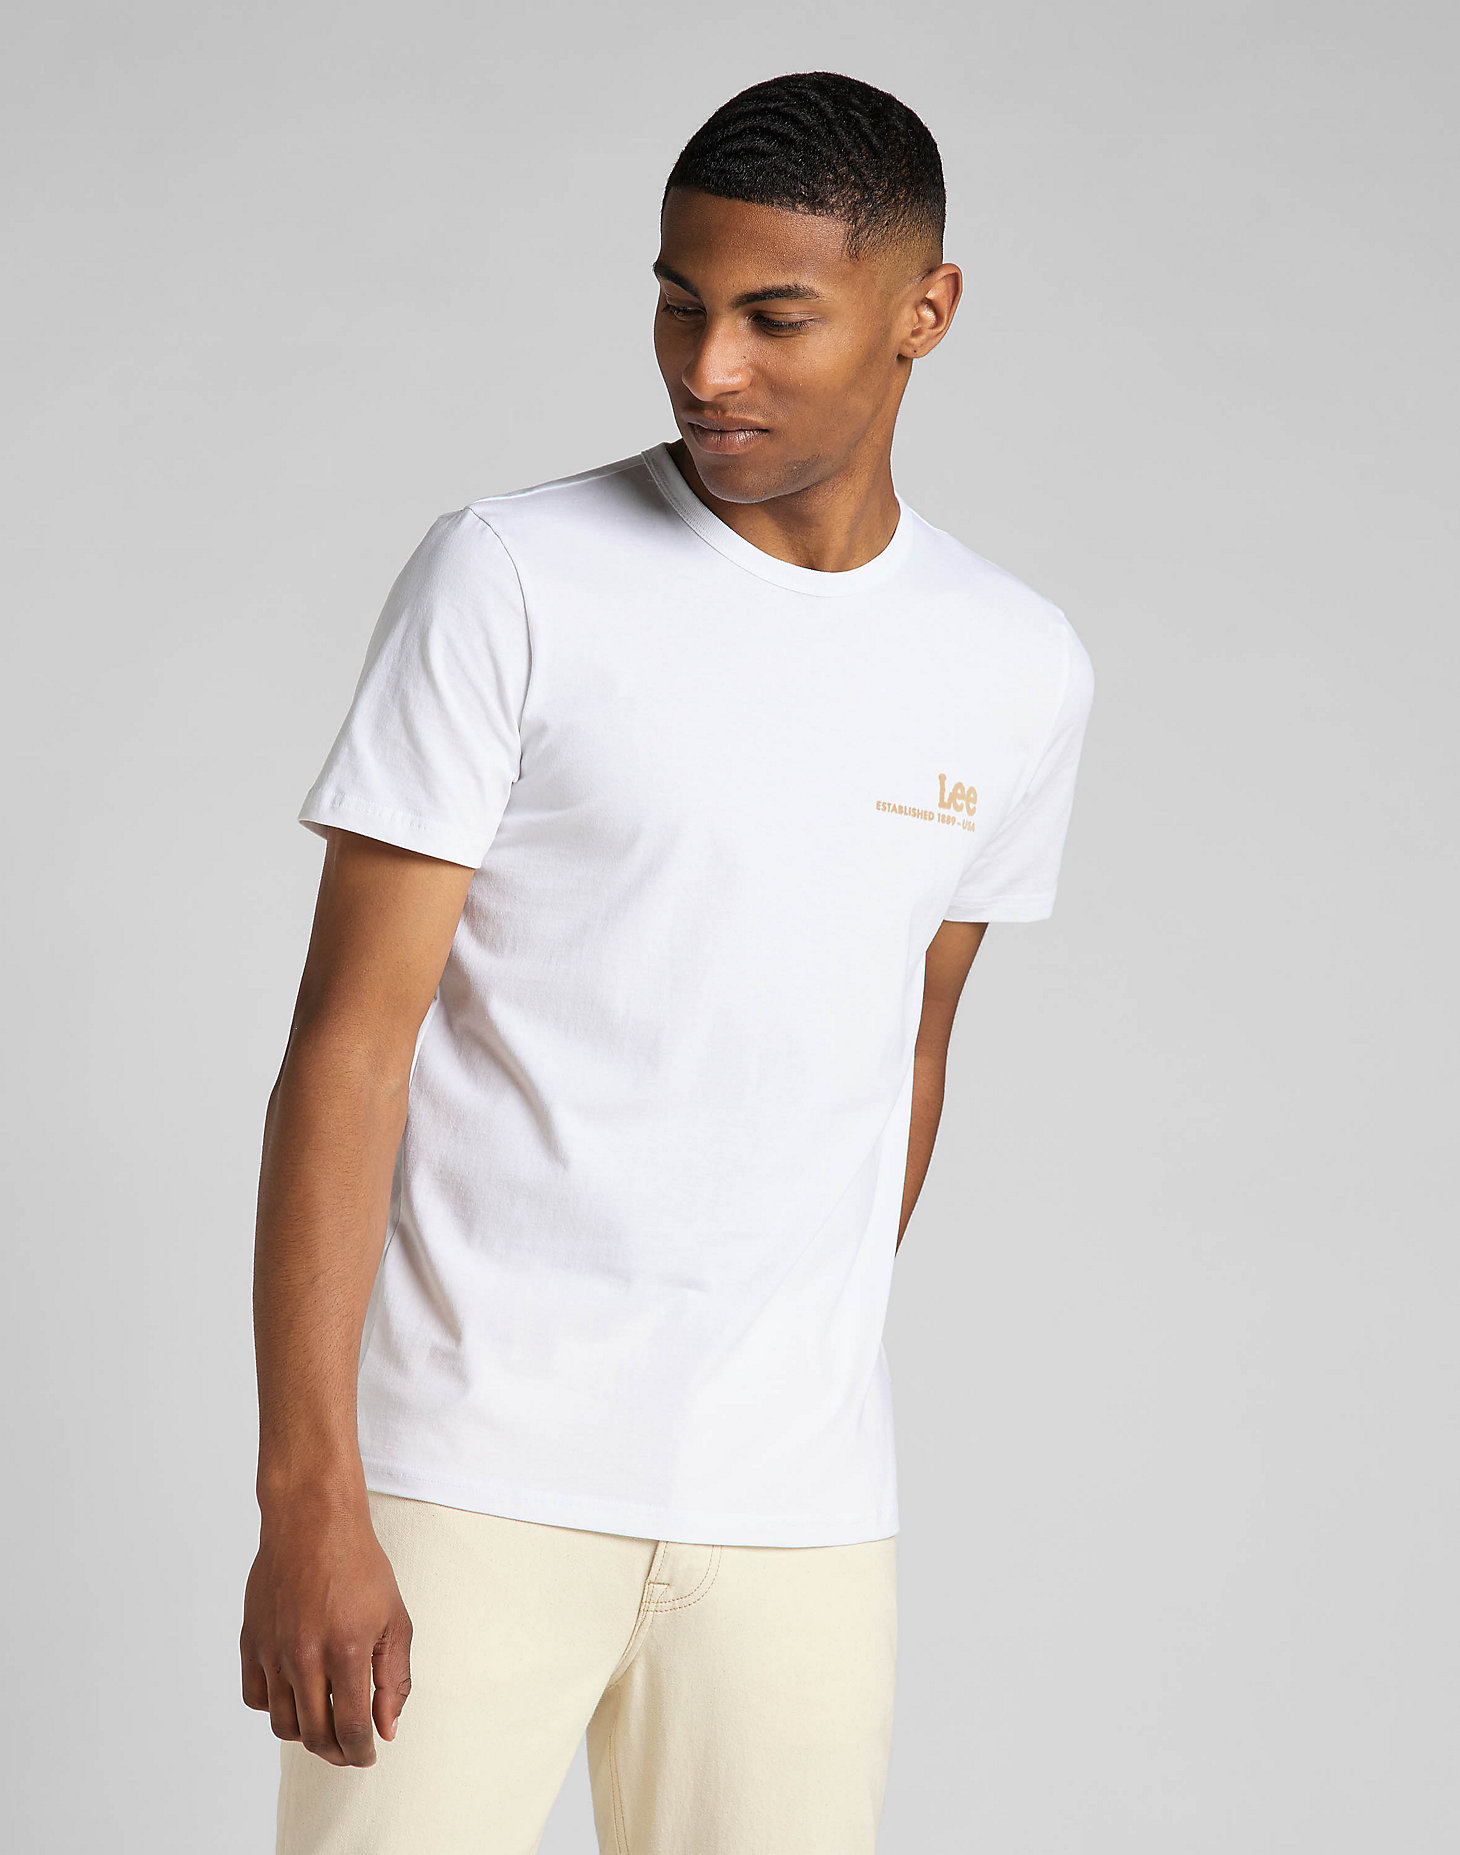 Short Sleeve Small Logo Tee in Bright White main view